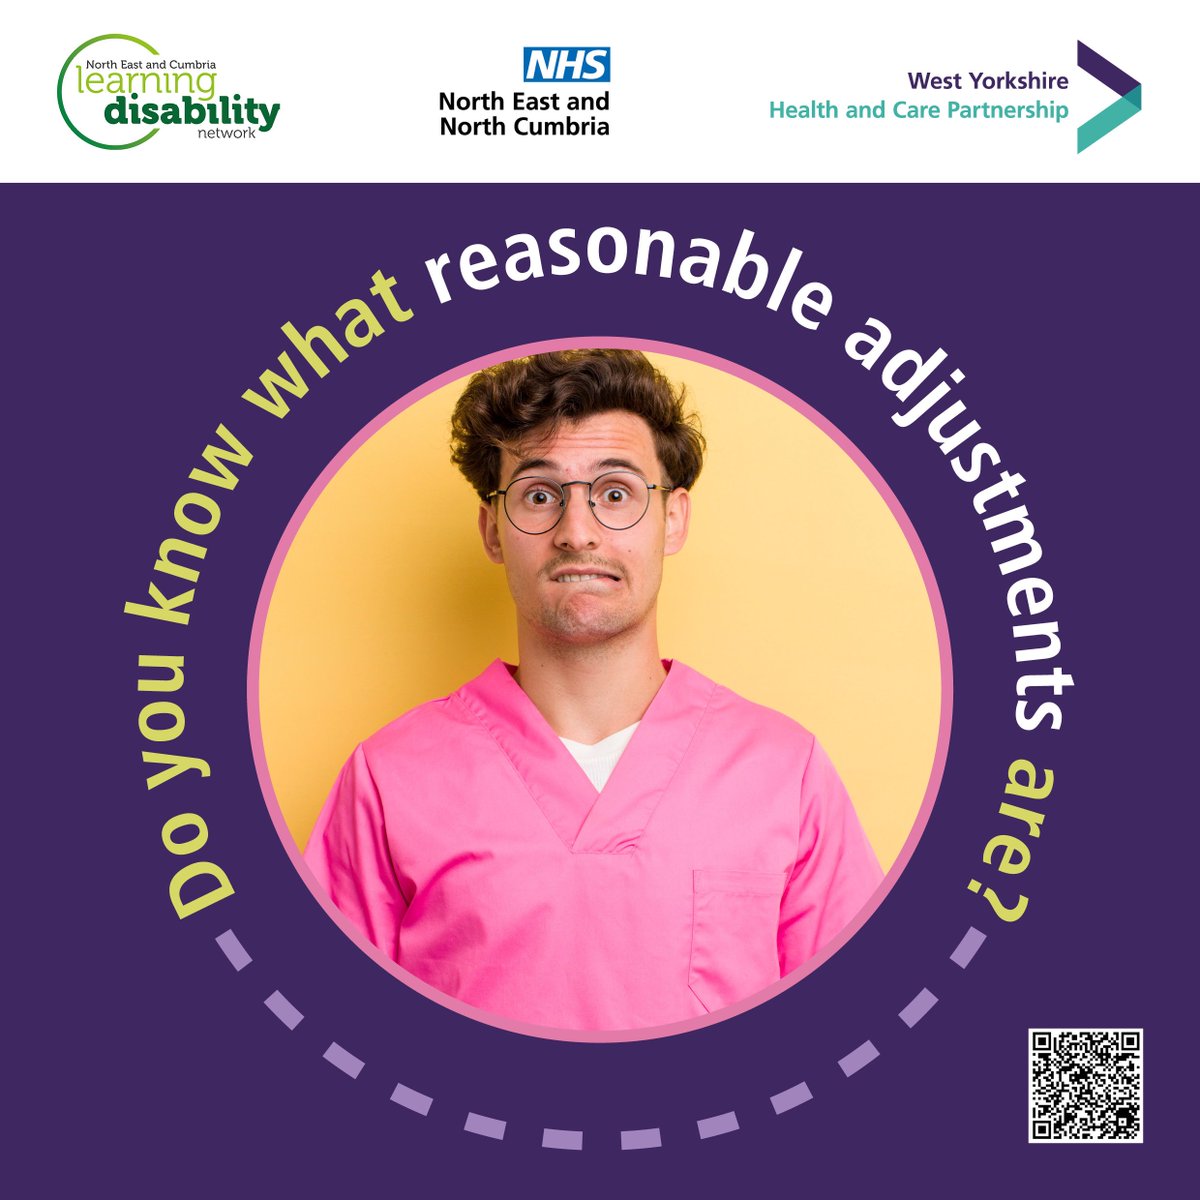 Do you know what reasonable adjustments are? If you care for someone with a learning disability or autism, you can find out more about what reasonable adjustments are & how to ask for them: wypartnership.co.uk/Training-learn…